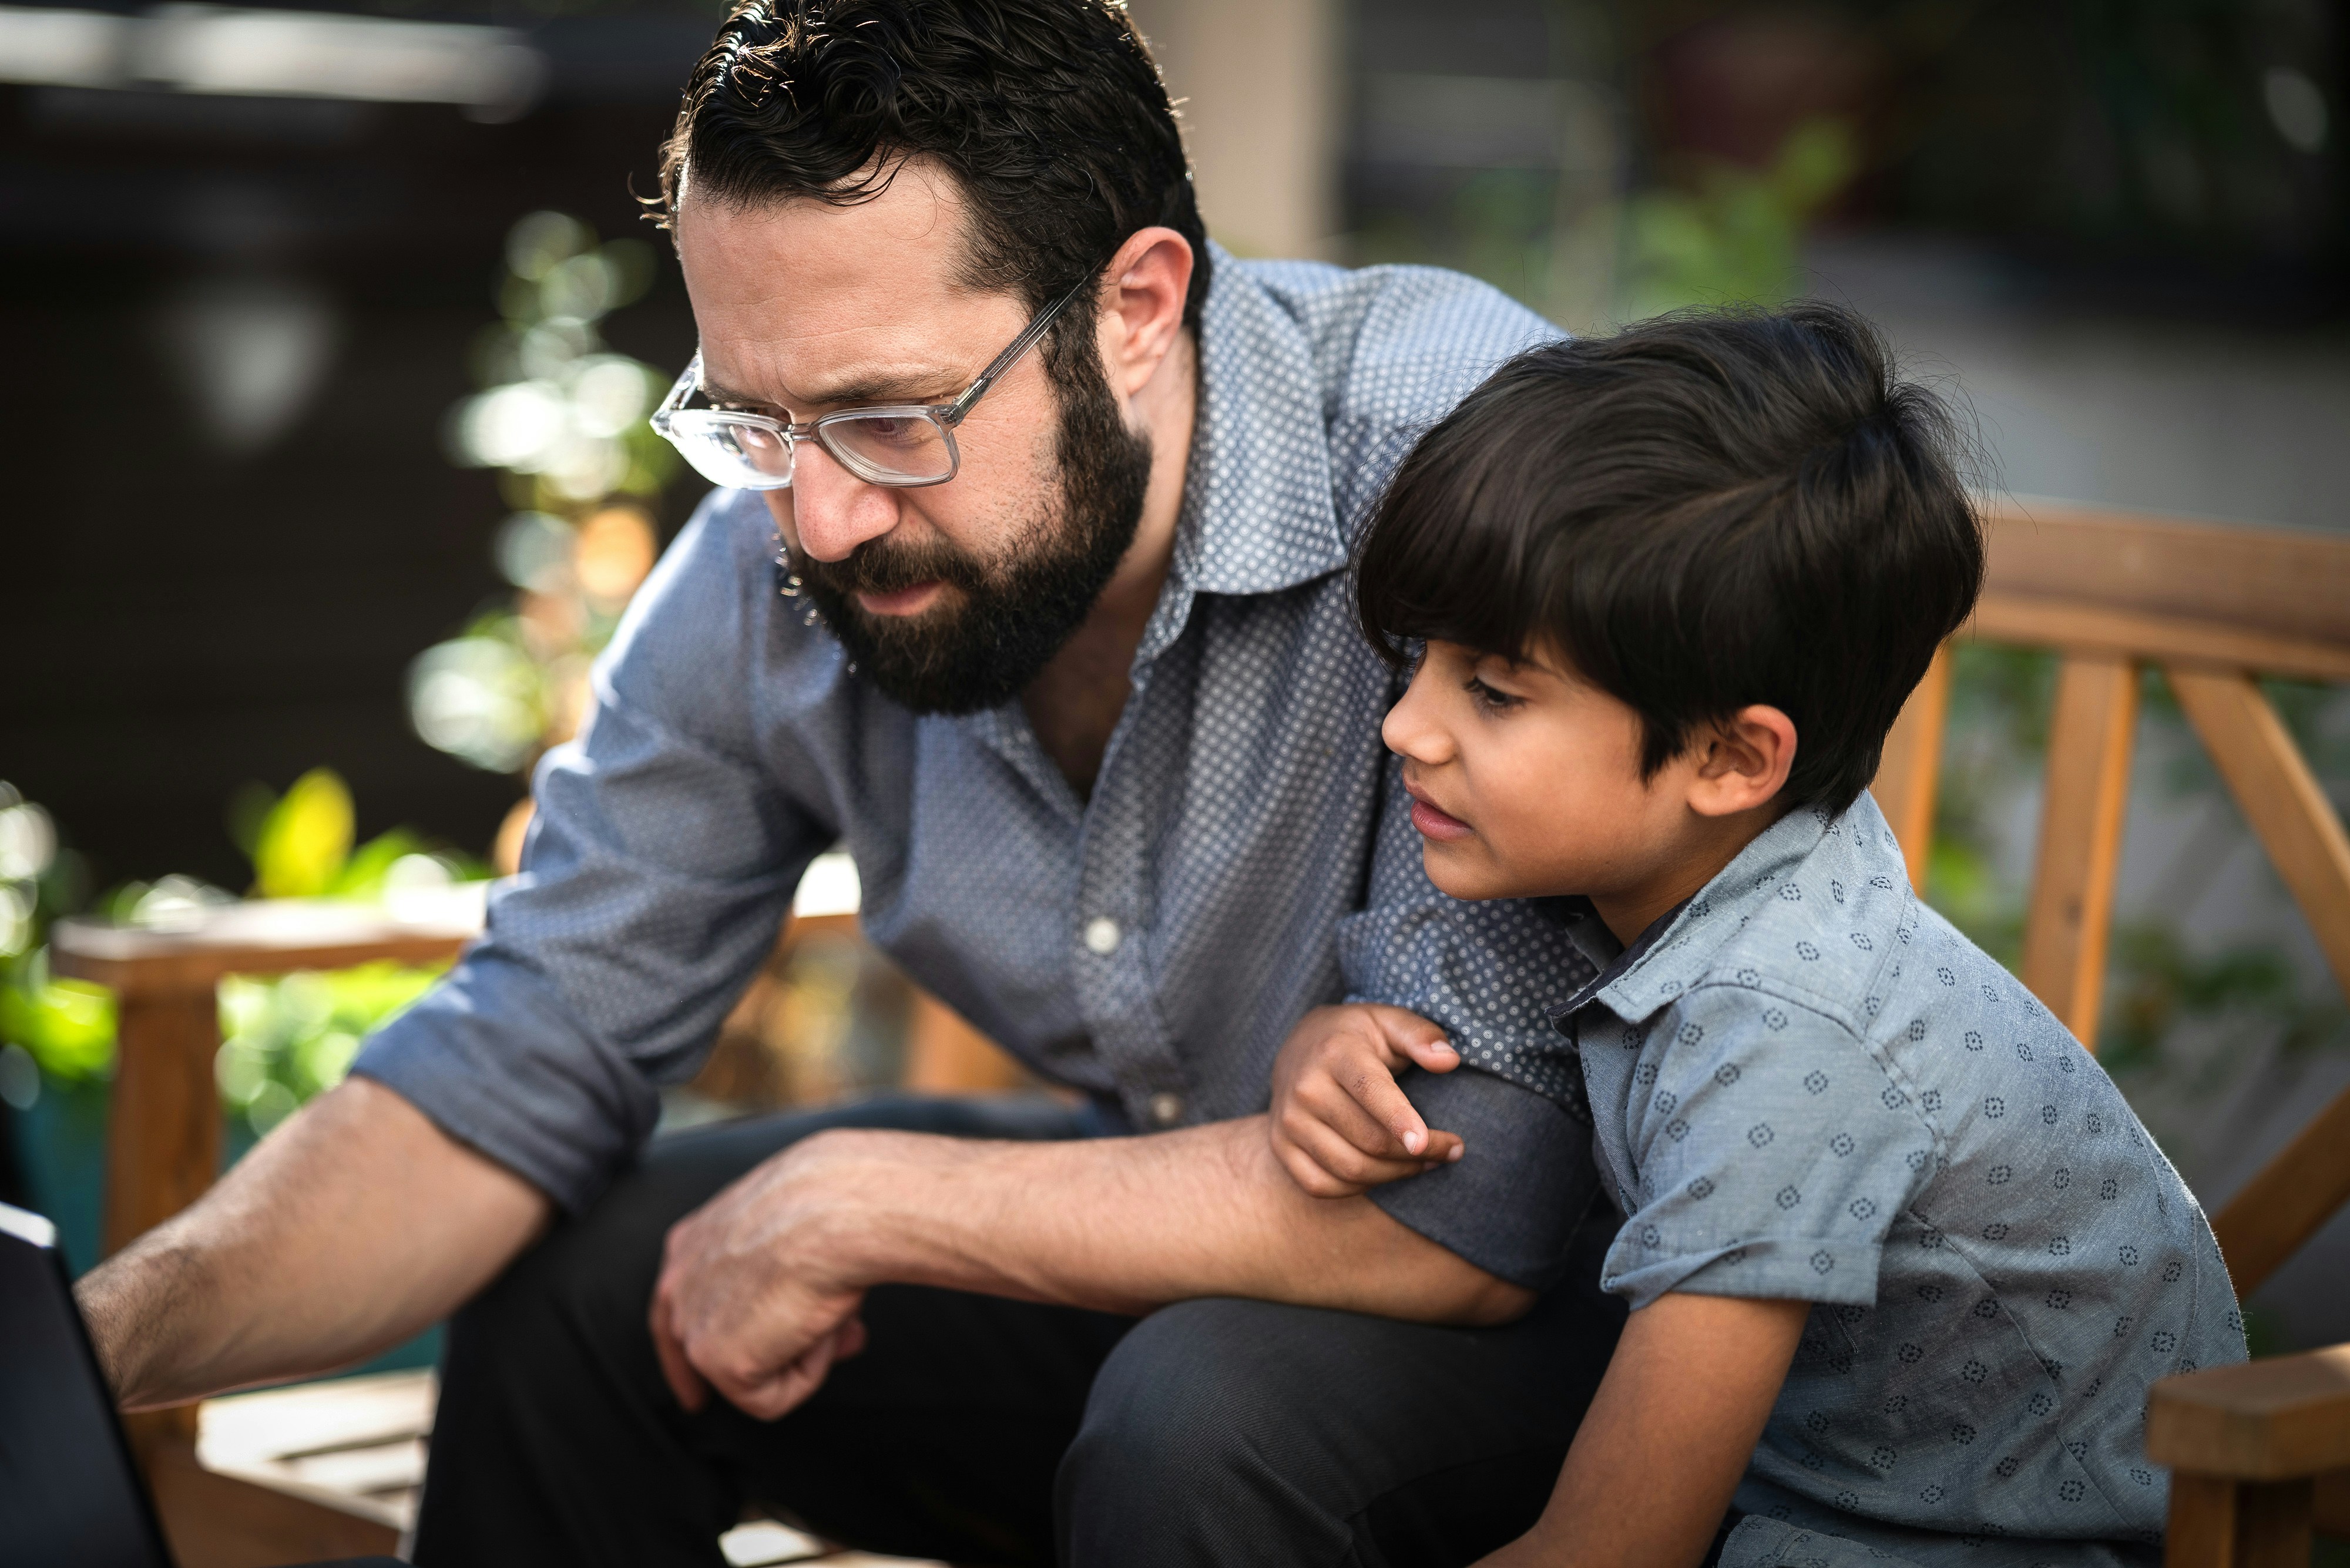 Eli Kasargod-Staub helps his seven-year-old son with his schoolwork, in the backyard of their home in Washington, D.C. on Tuesday, October 19, 2021. Photo by Cheriss May